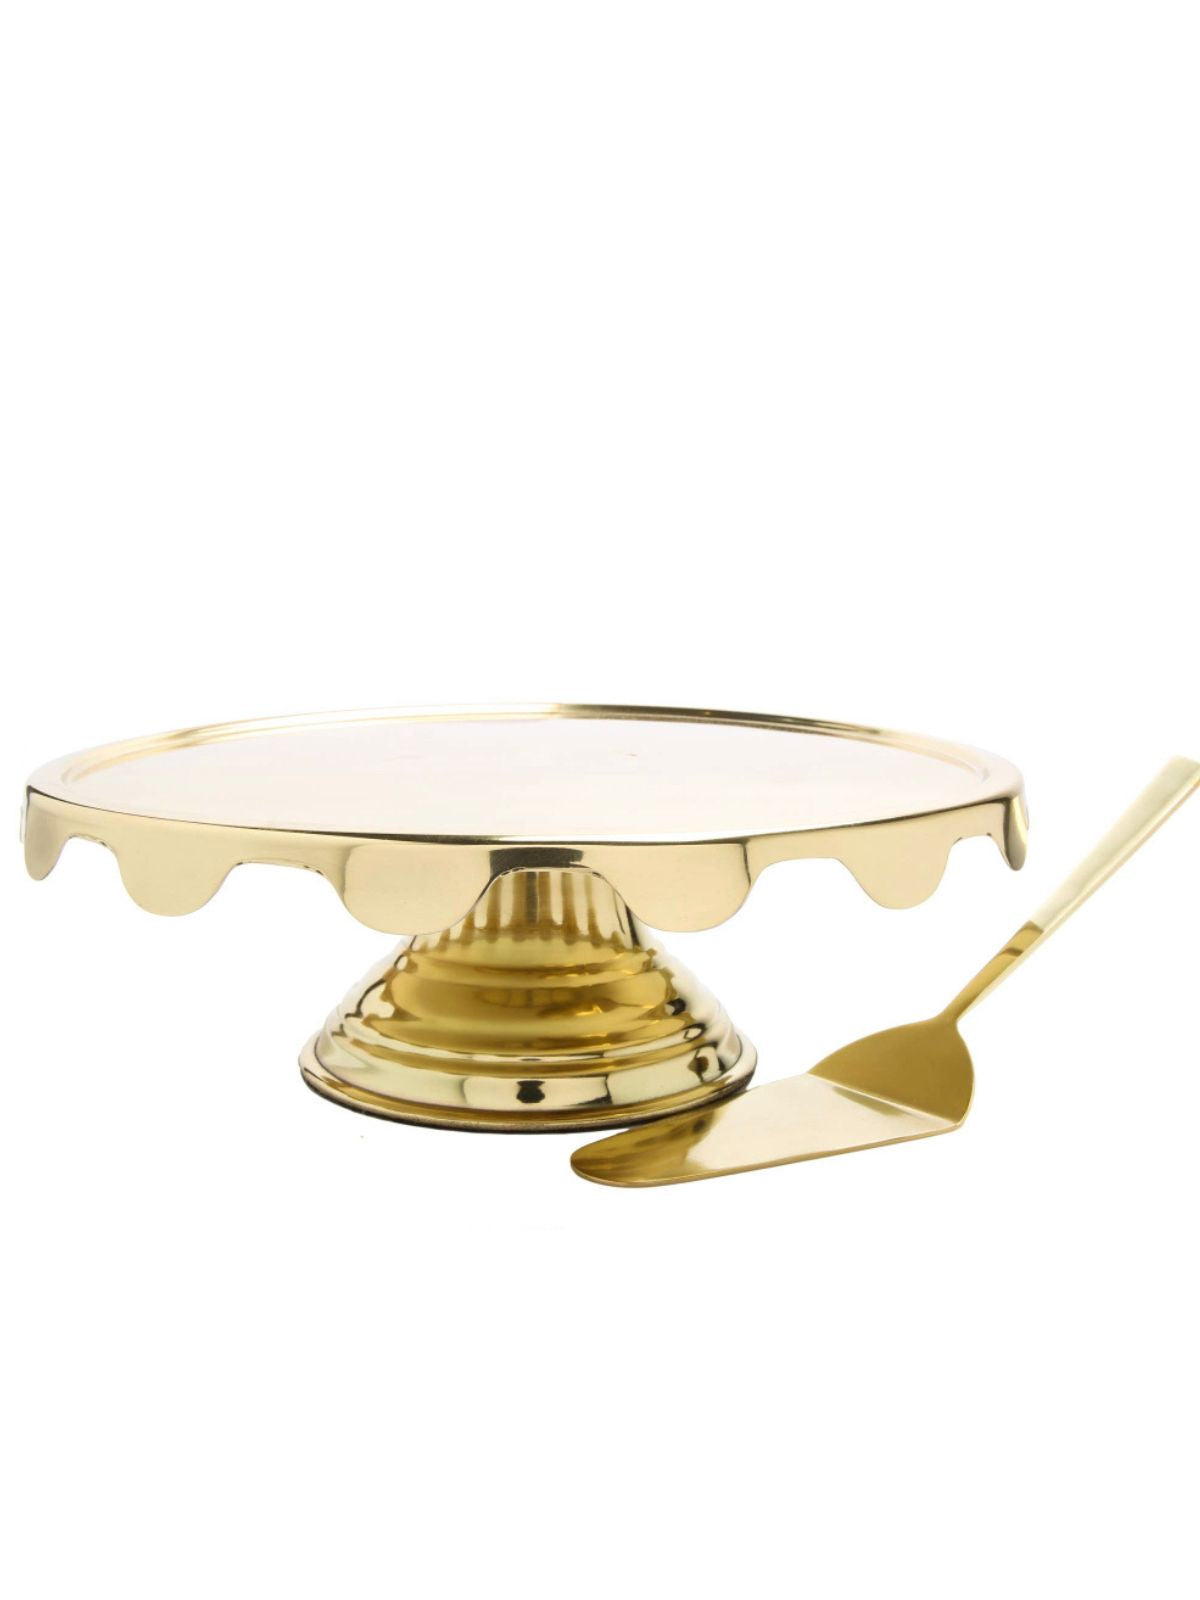 Gold Stainless Steel Cake Stand and Server Set sold by KYA Home Decor.